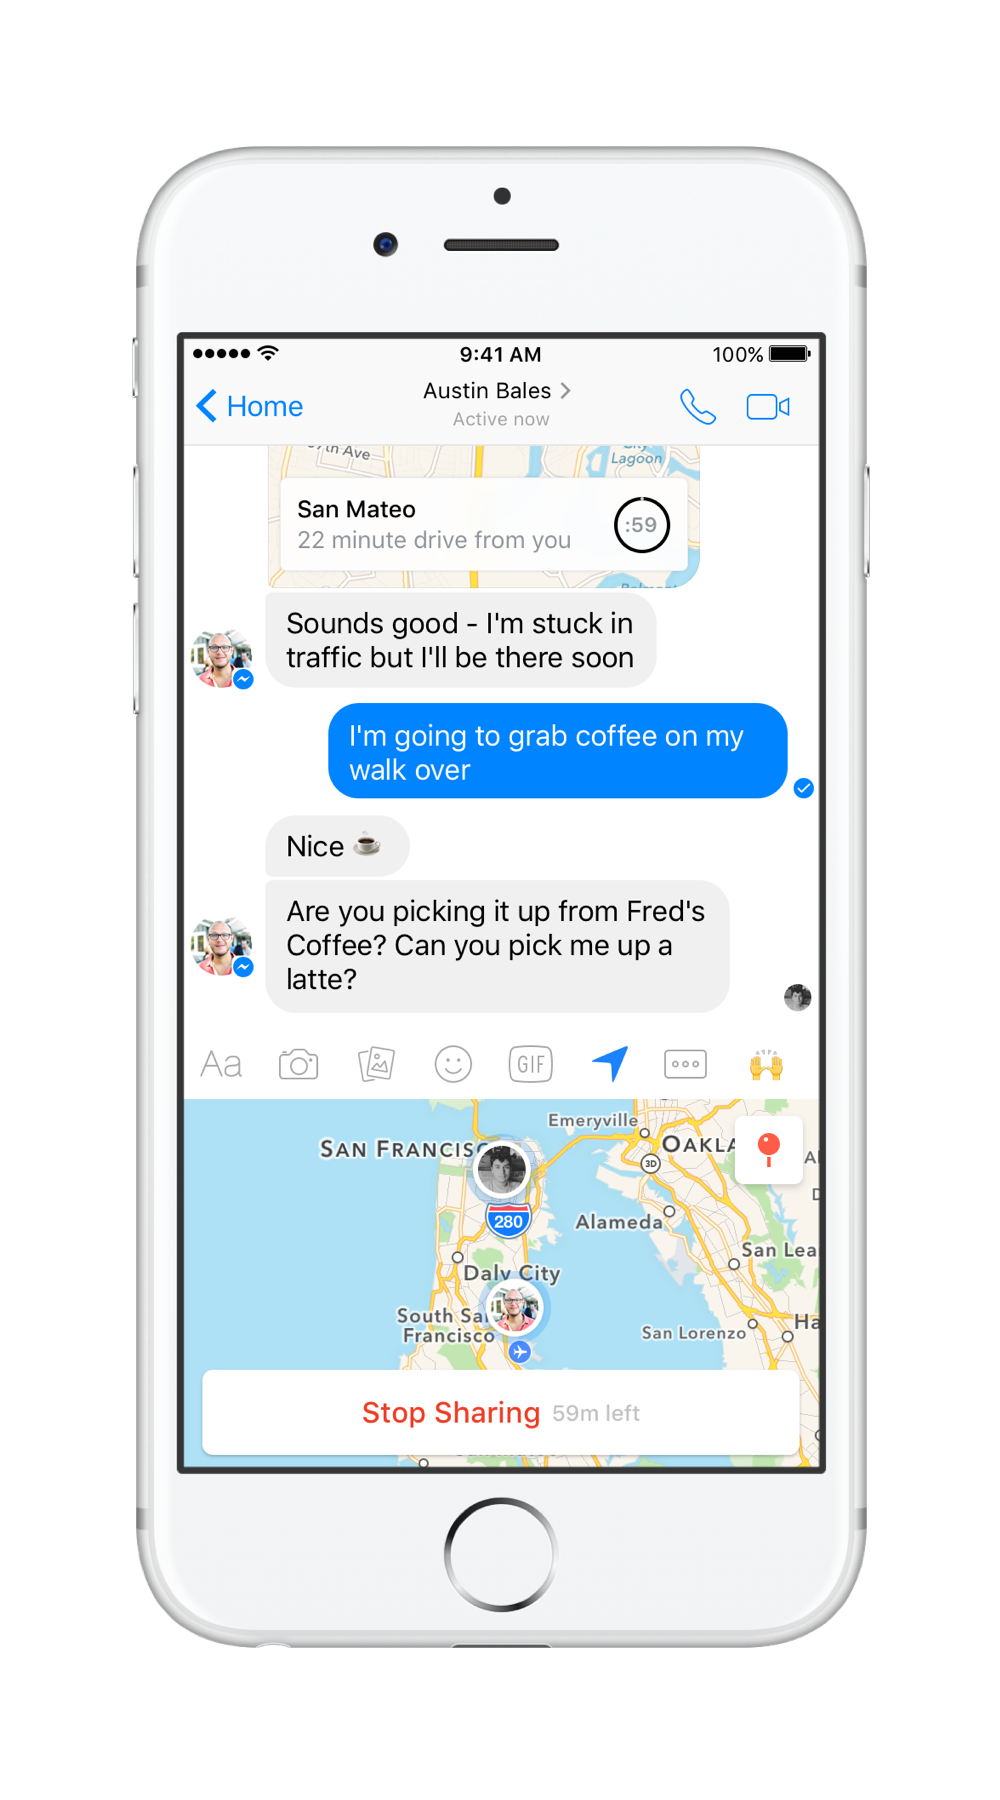 Live Location will allow you to share your position on a map in real time, for up to 60 minutes - Share your location on a real time map with Facebook Messenger's Live Location